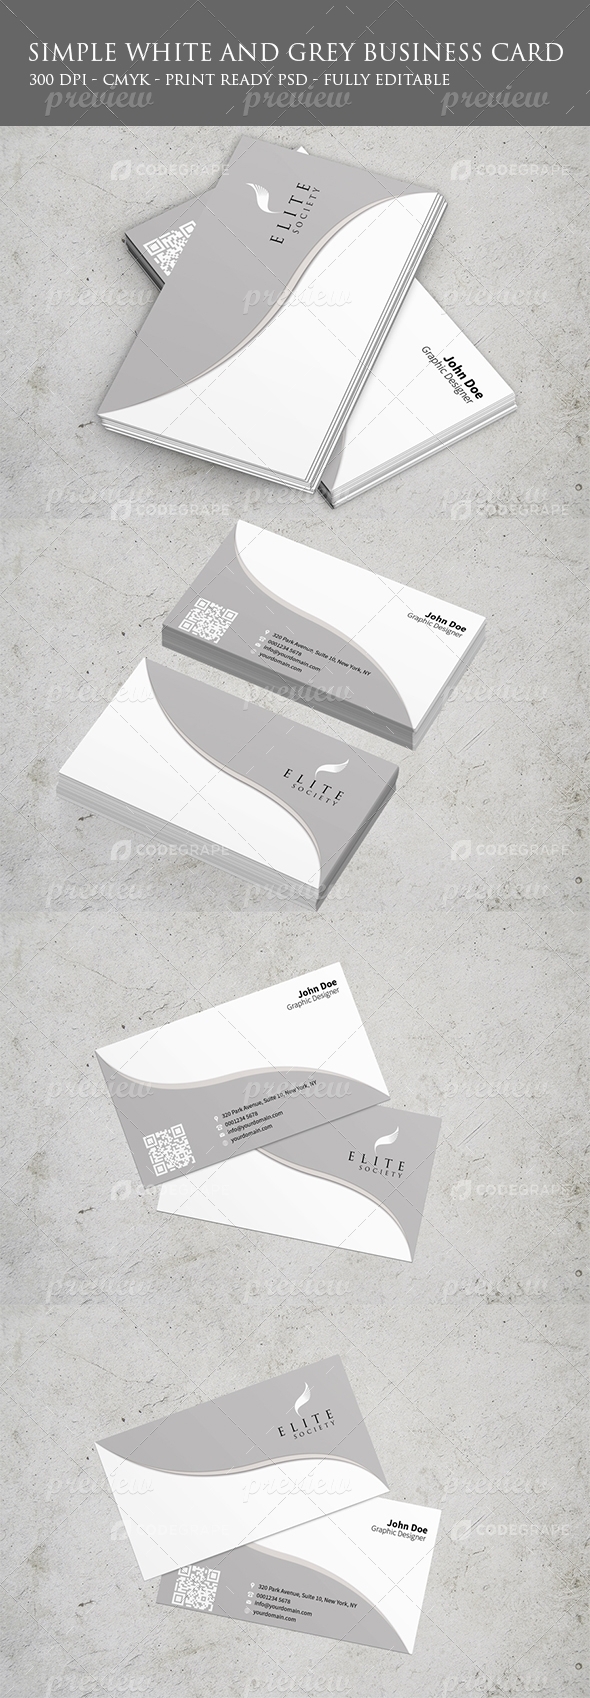 White & Grey Business Card